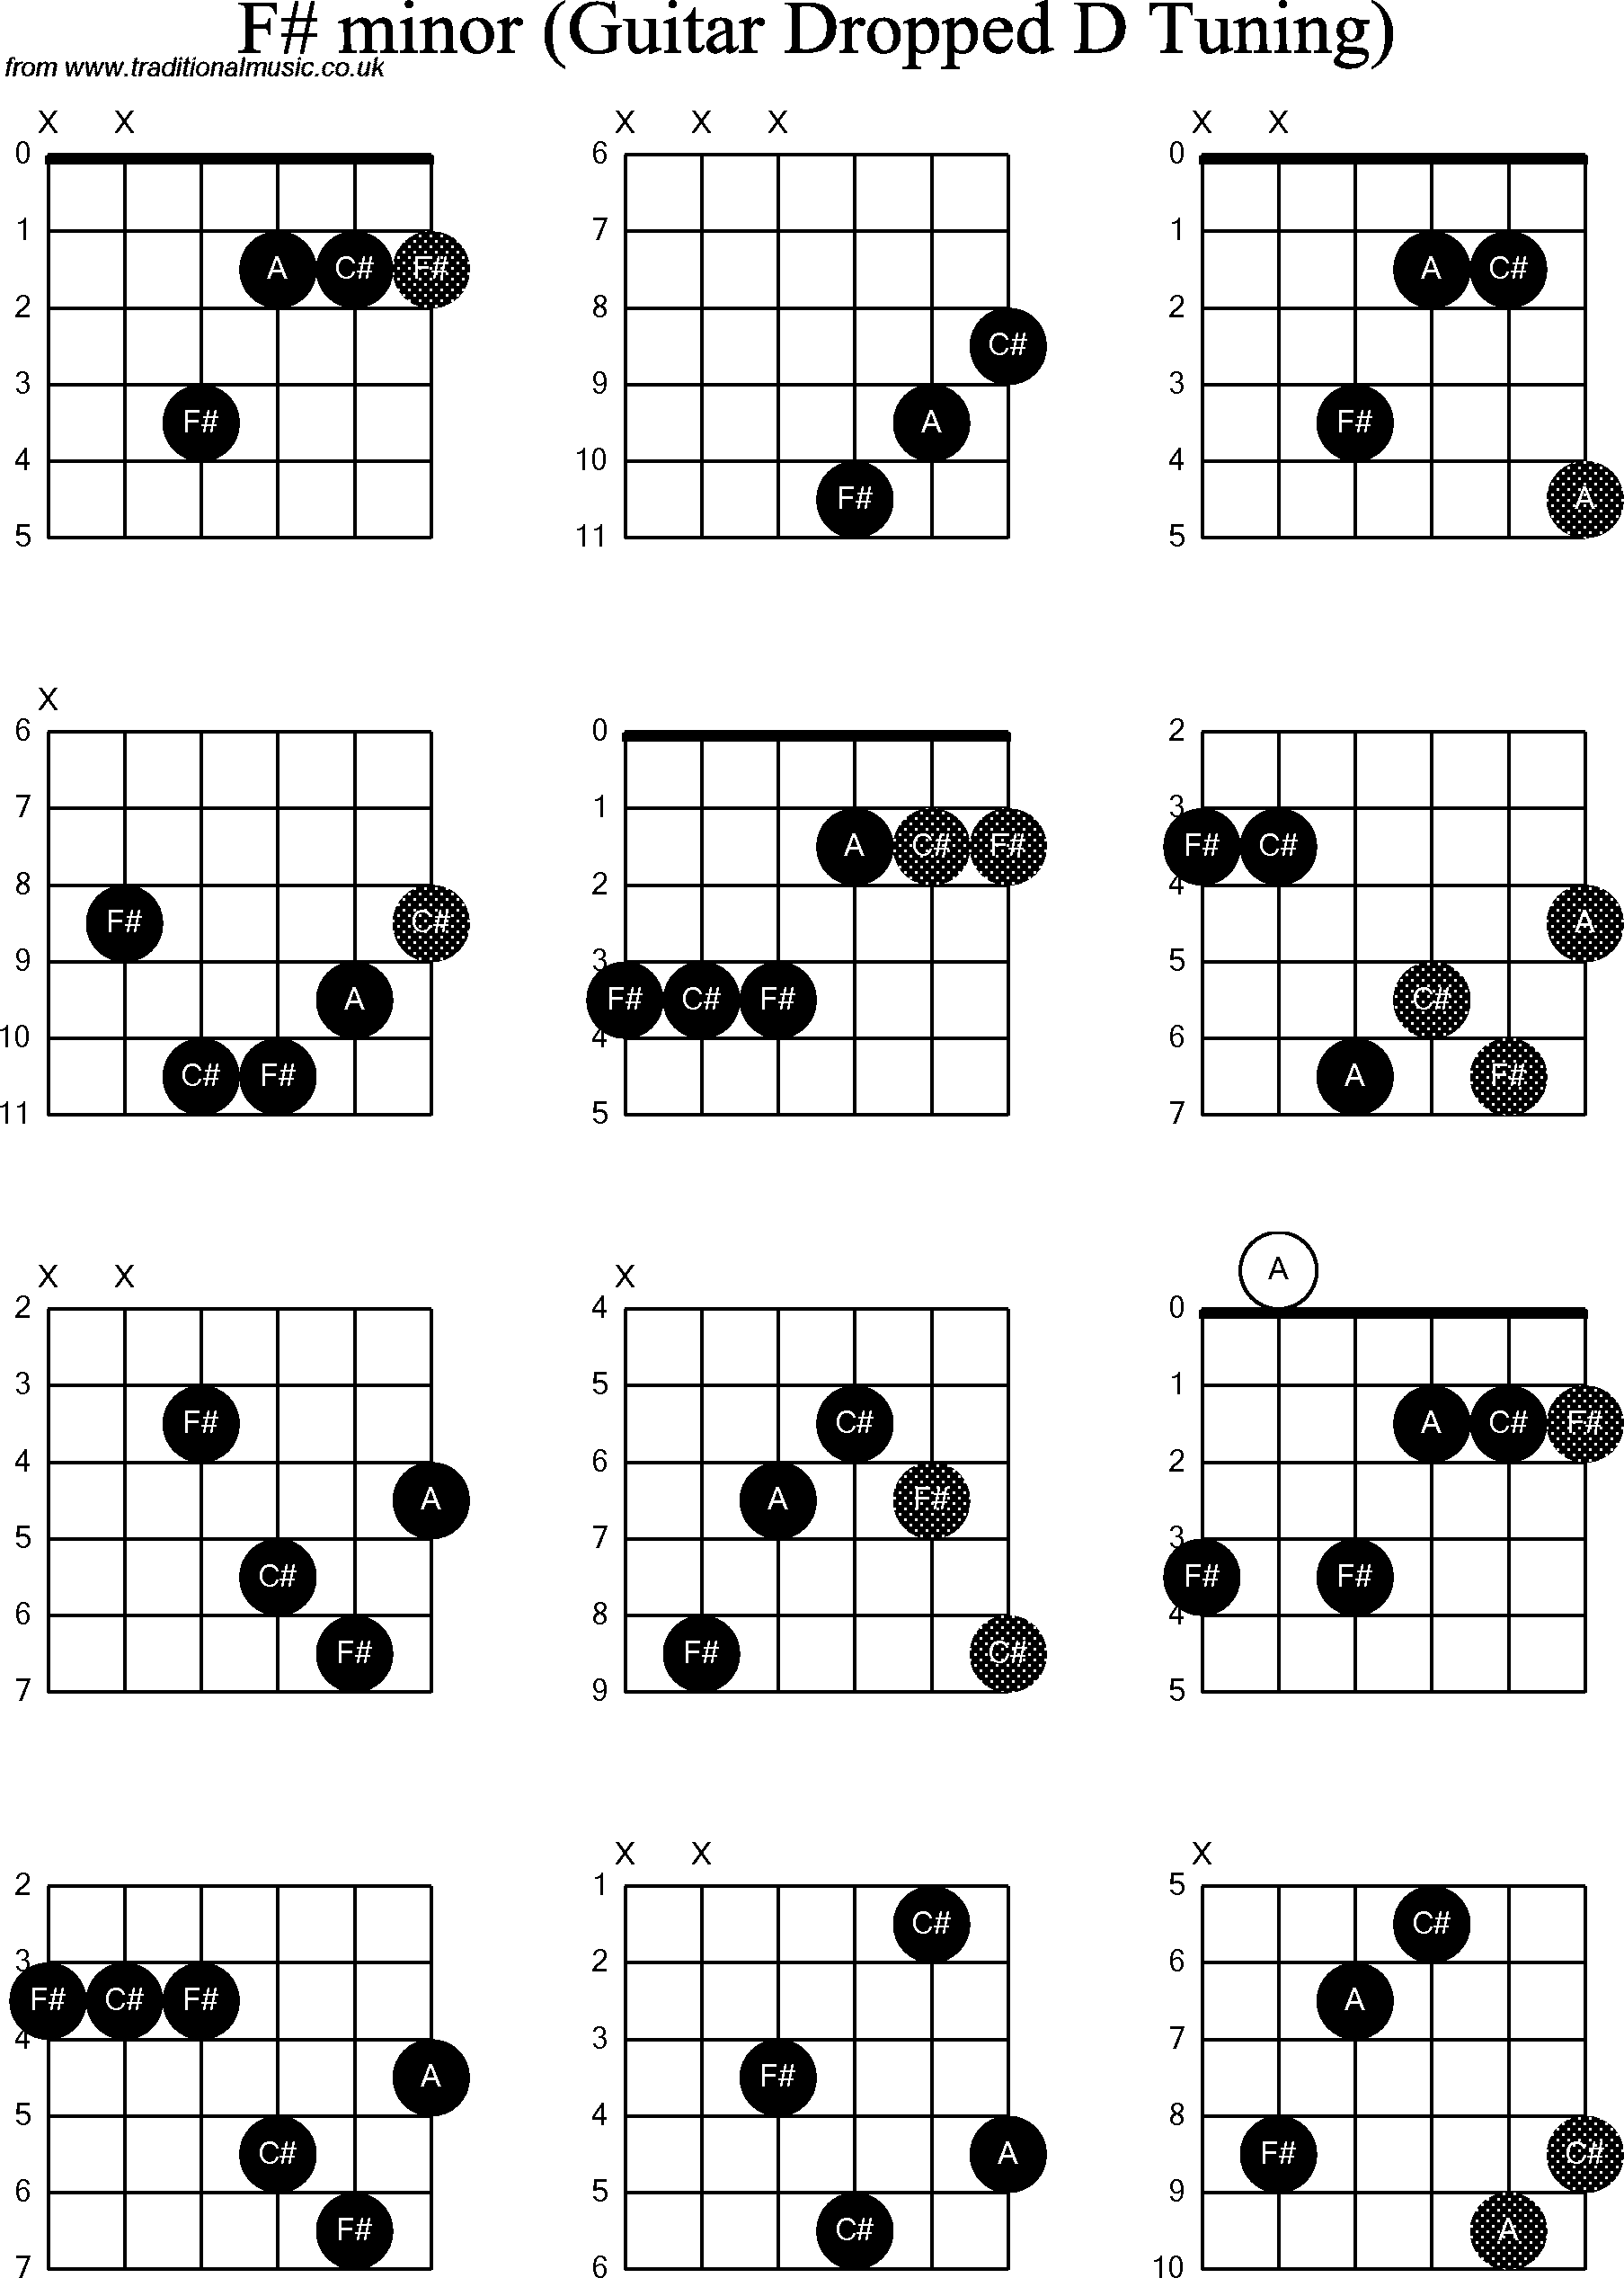 Chord diagrams for dropped D Guitar(DADGBE), F Sharp Minor